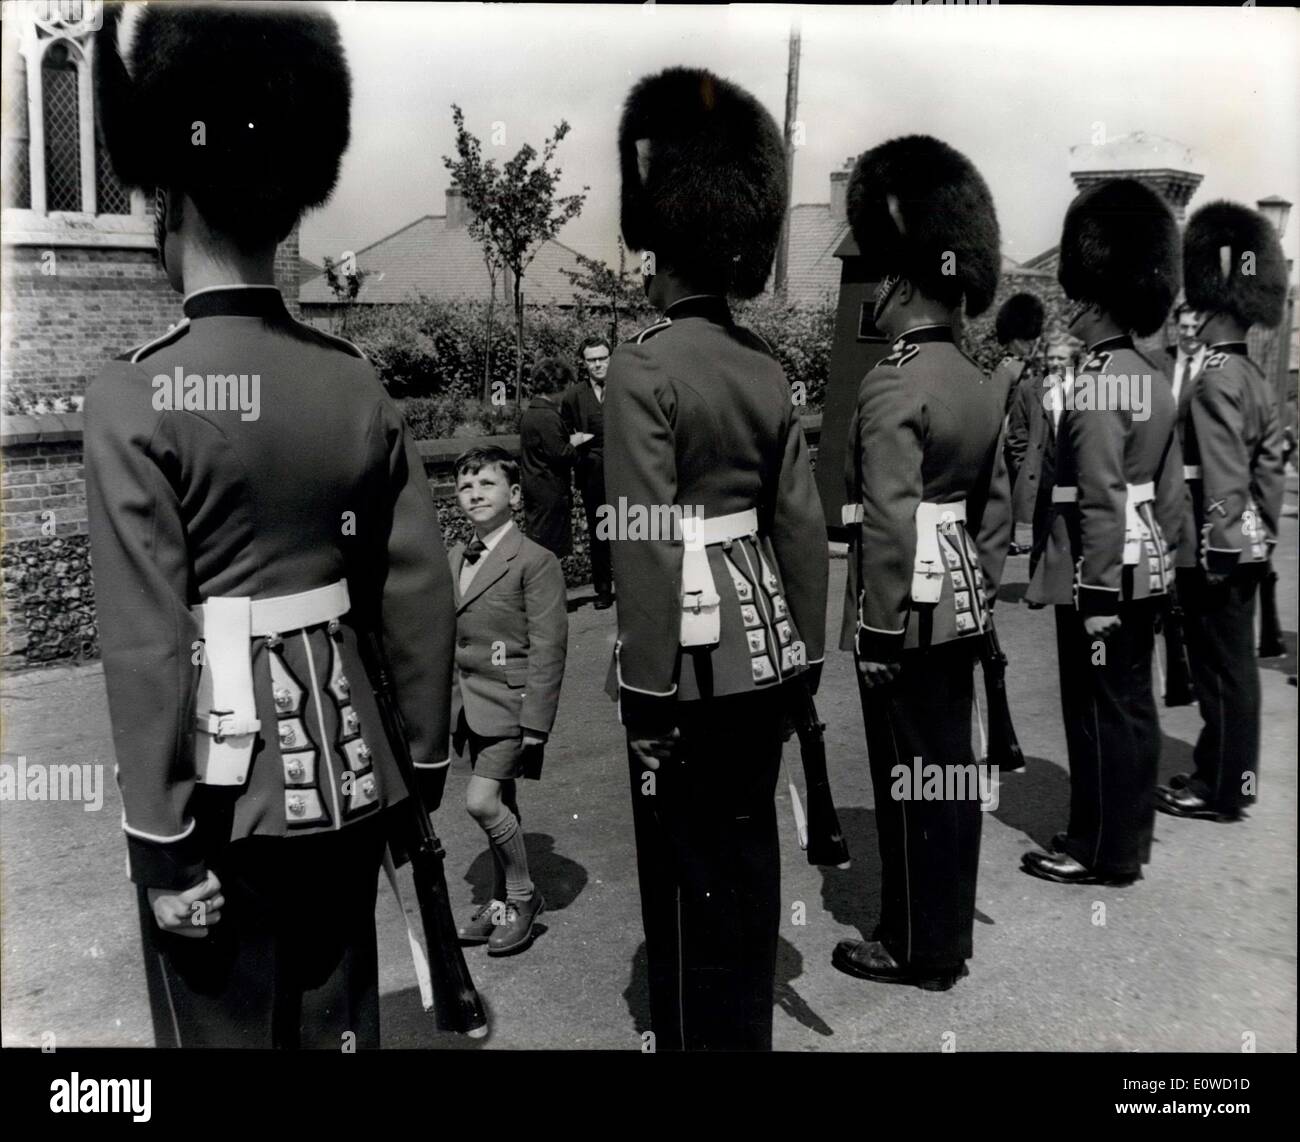 Jun. 01, 1962 - The Guardsman - aged nine: Nine year old Alexander Morris, son of a docker from Bootle, Lancasm is having the treat o his life - for he is the guest for three days of the Grenadier Guards at Catherham Barracks - as a reward for being the best marcher in a Youth Parade. Alex and his mother were met at Euston Station by Lieut. John Brown of the Grenadier Guards and after watching the Guards at St. James a Palace - be went to Caterham where visited the parade ground to 'Show the Guards how to march Stock Photo